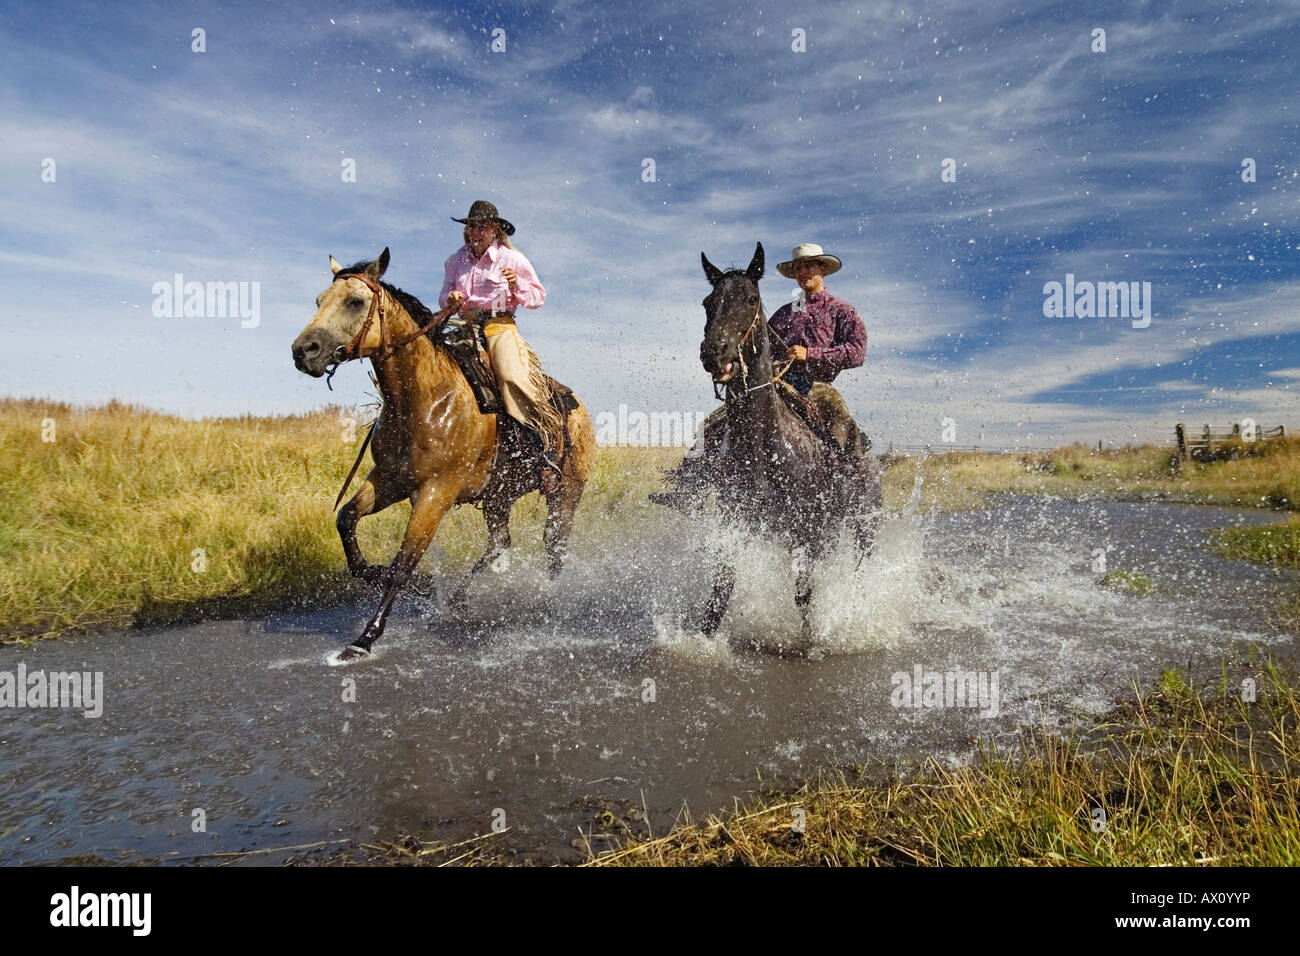 Cowboy and cowgirl riding in water wildwest, Oregon USA Stock Photo